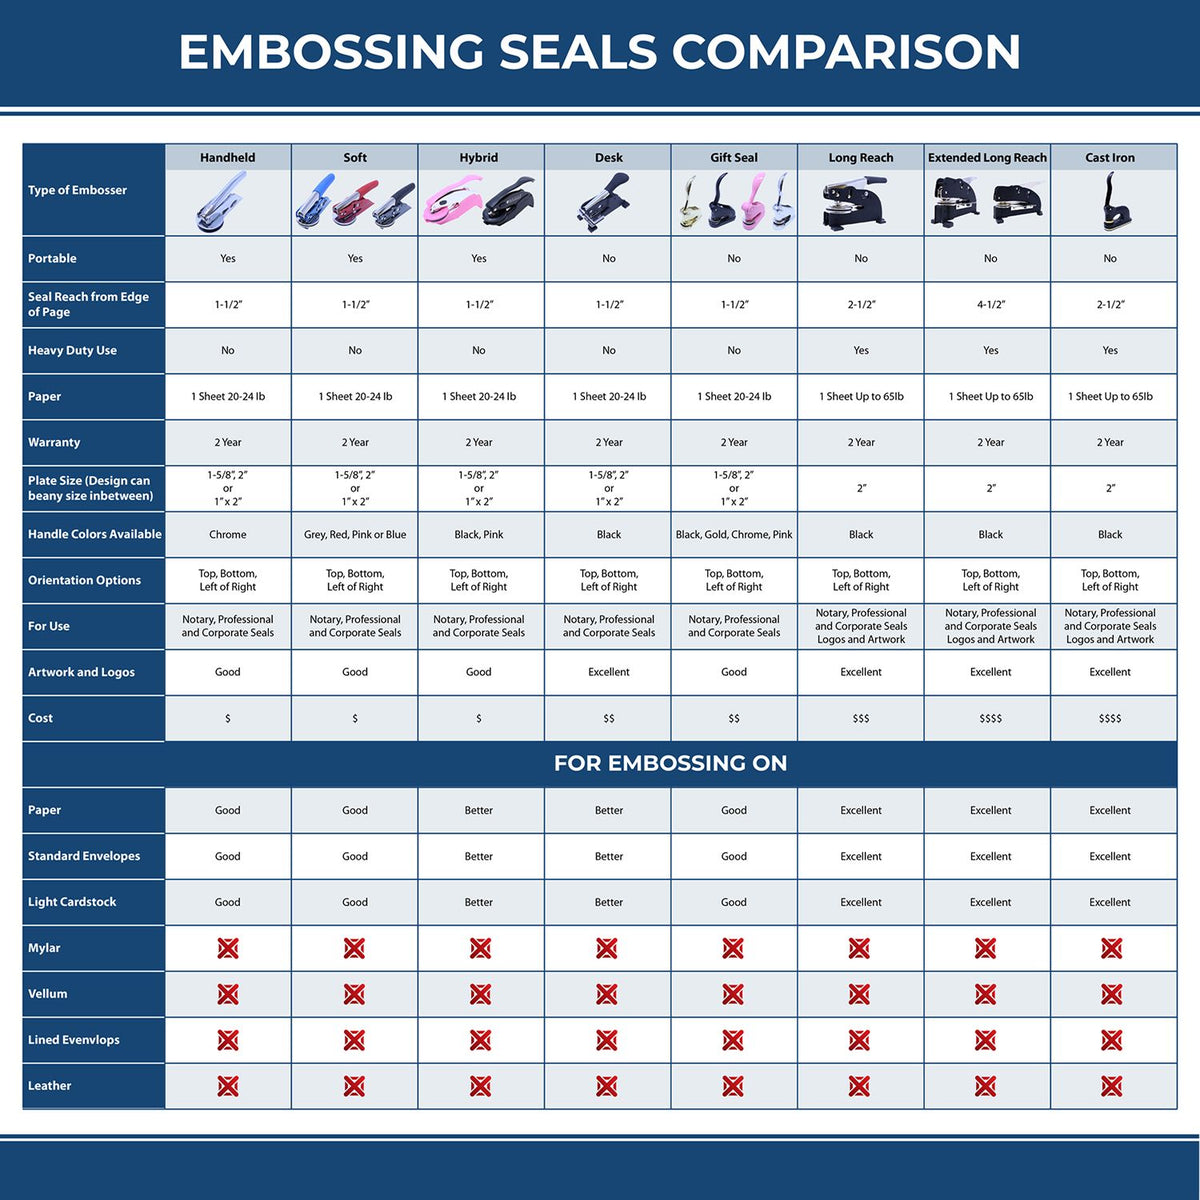 A comparison chart for the different types of mount models available for the Heavy Duty Cast Iron Virginia Engineer Seal Embosser.